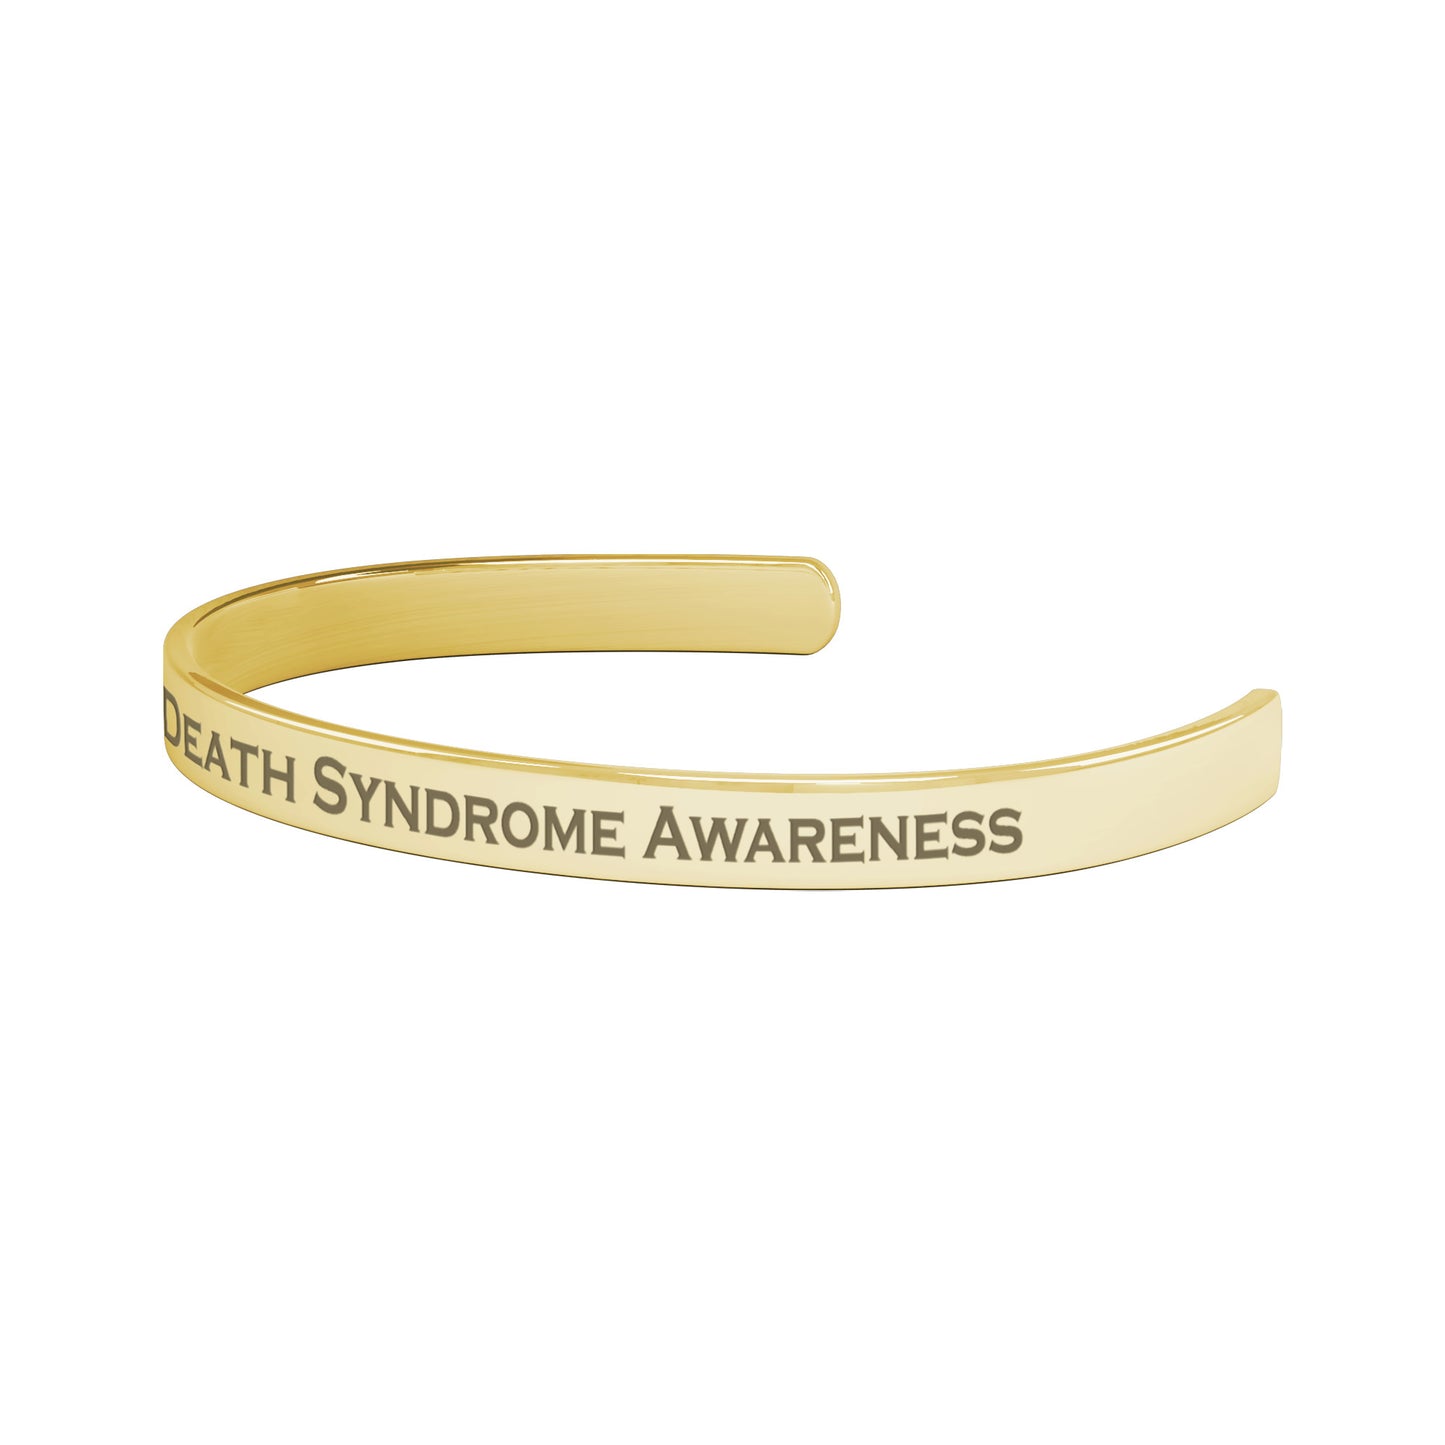 Personalized Sudden Infant Death Syndrome Awareness Cuff Bracelet